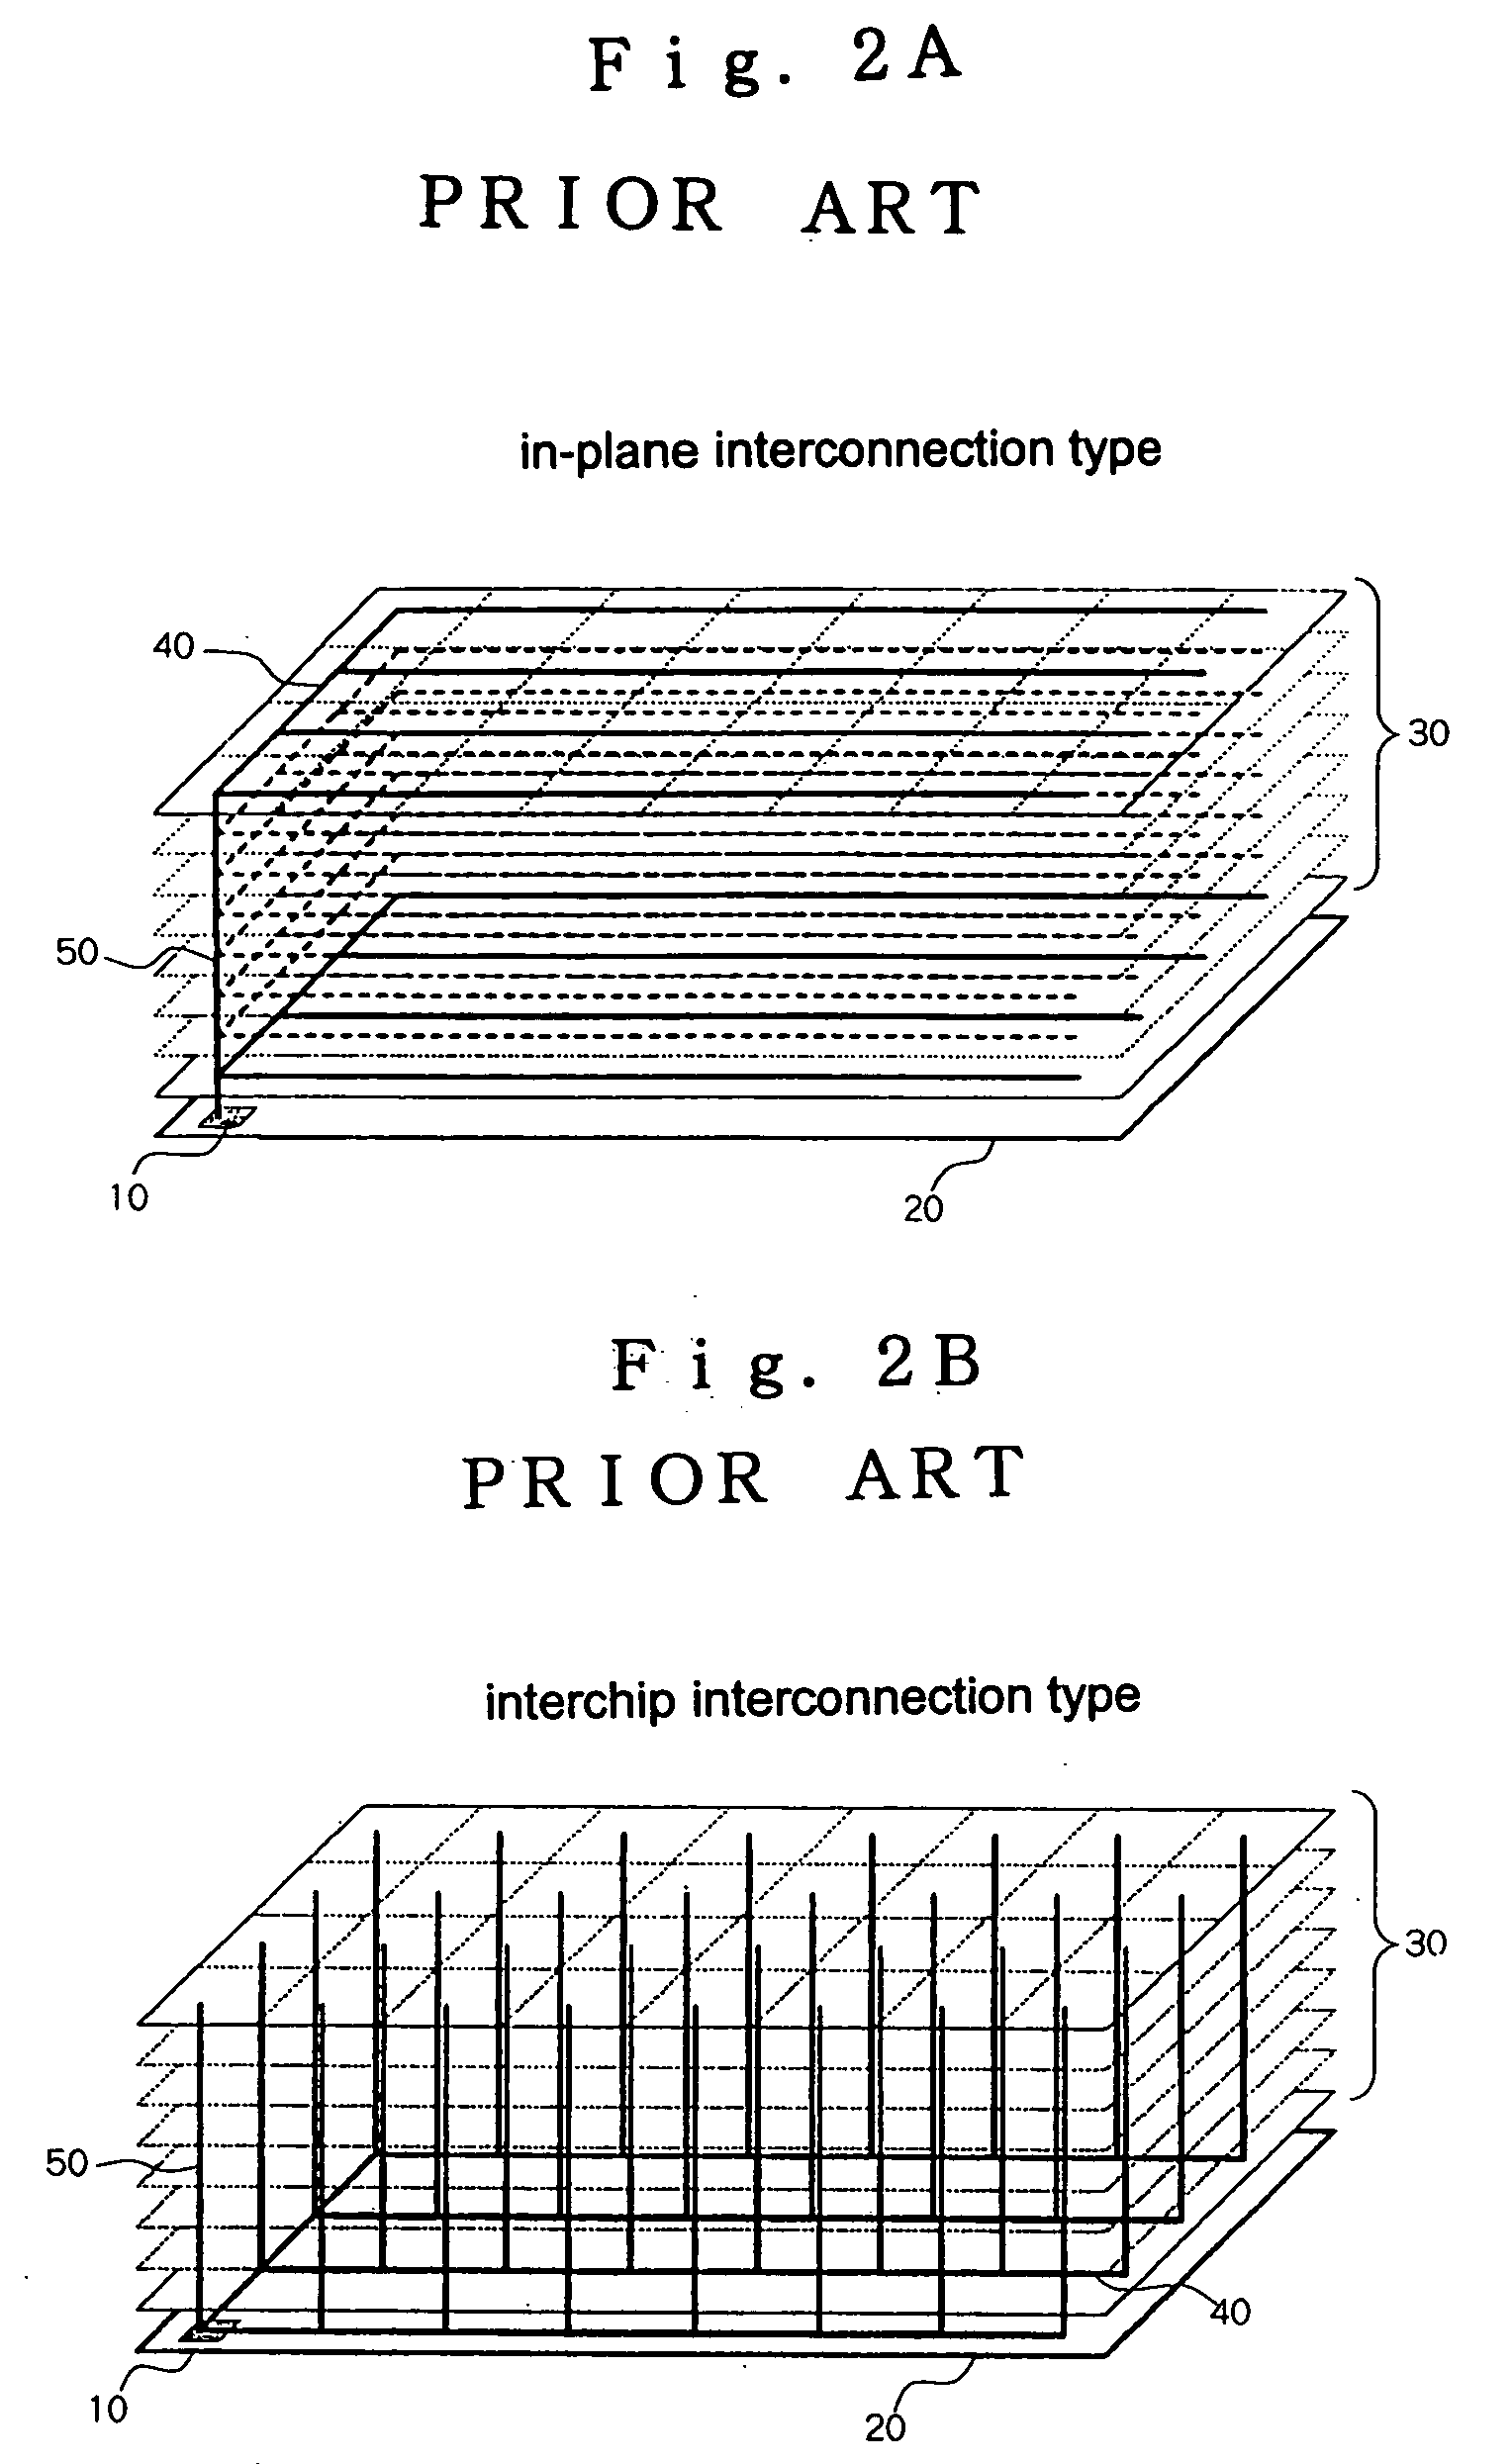 Three-dimensional semiconductor device provided with interchip interconnection selection means for electrically isolating interconnections other than selected interchip interconnections